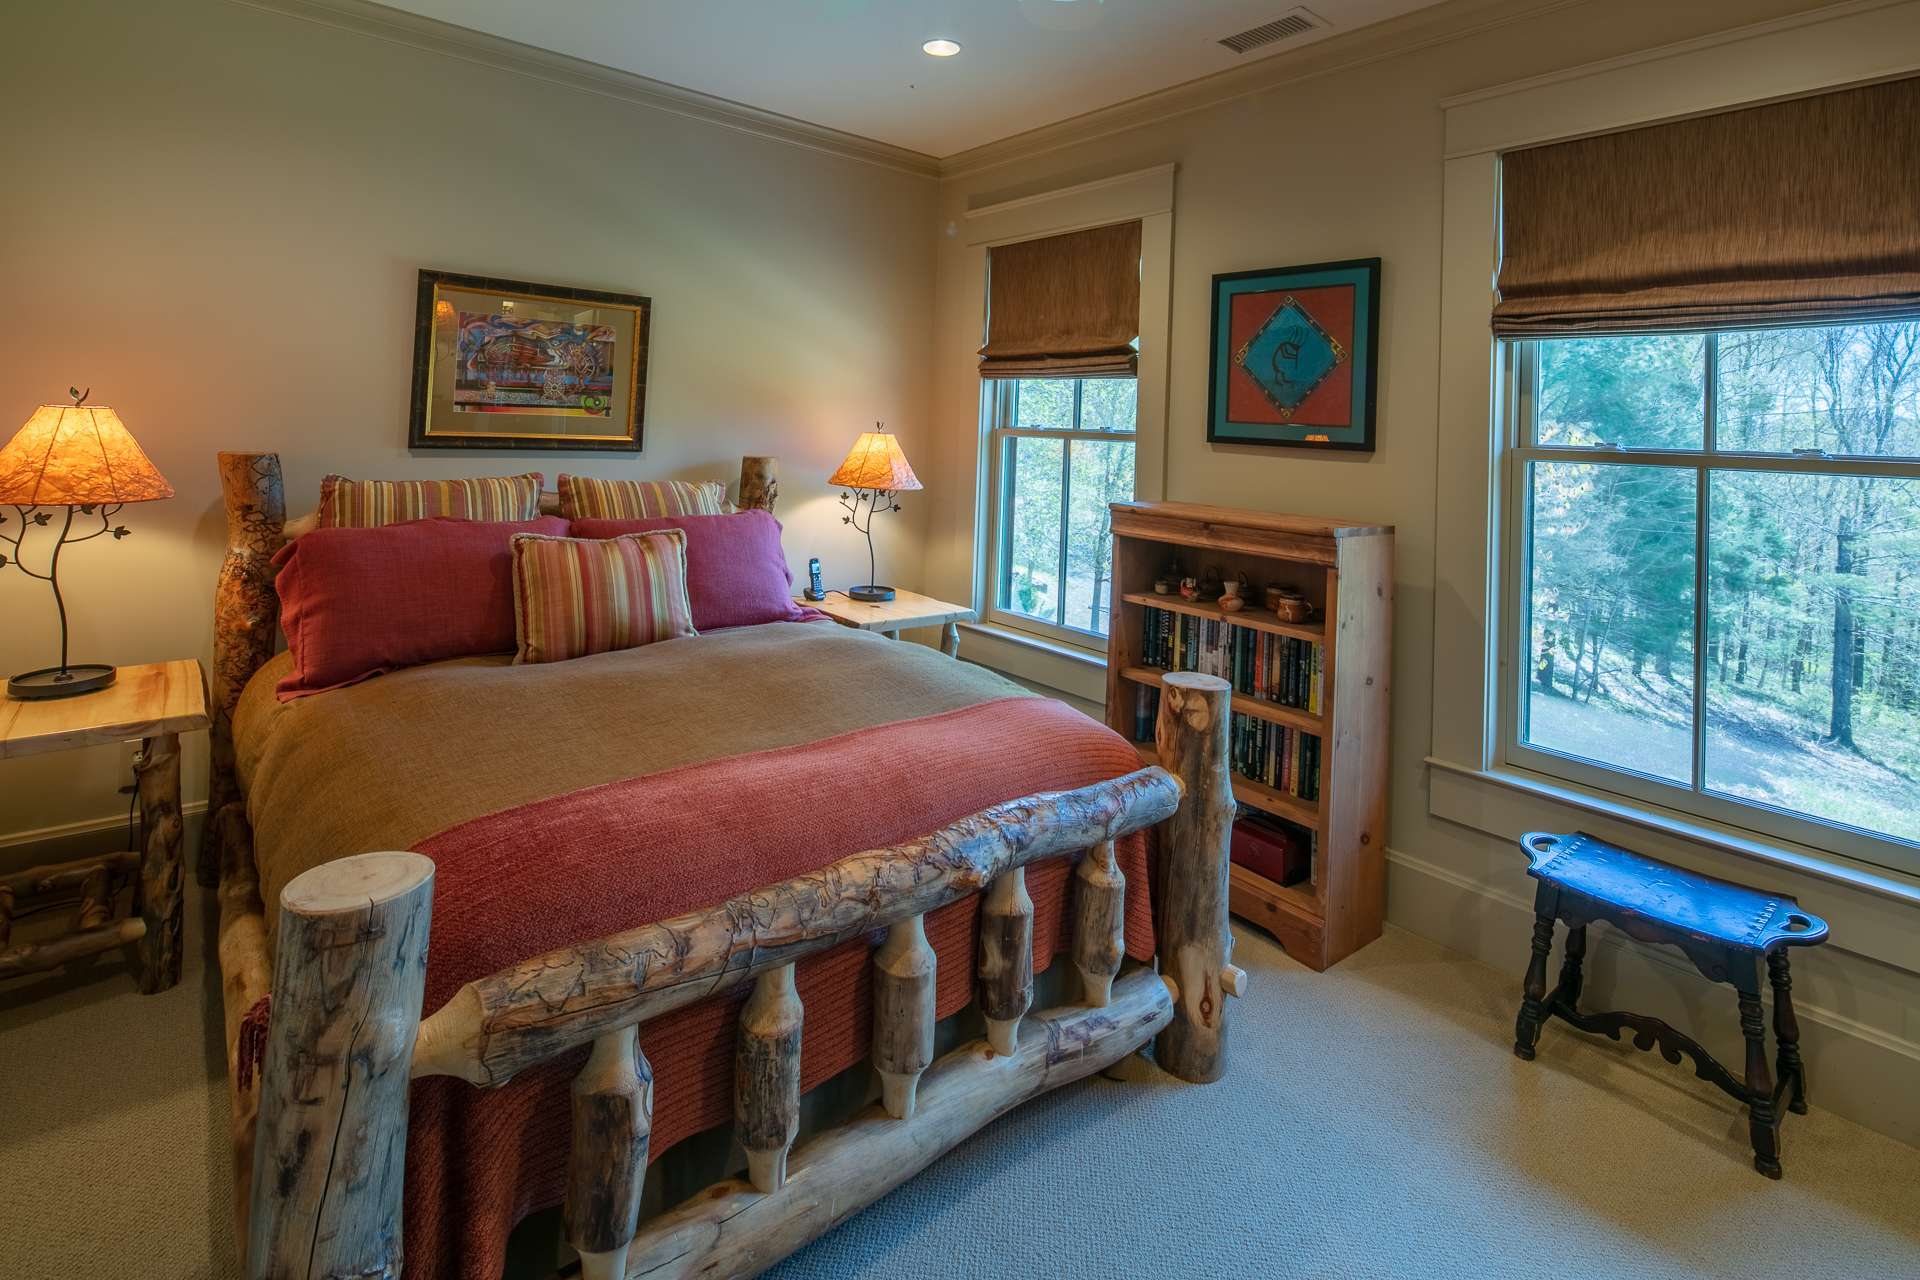 All of the upper level bedrooms are spacious and inviting.